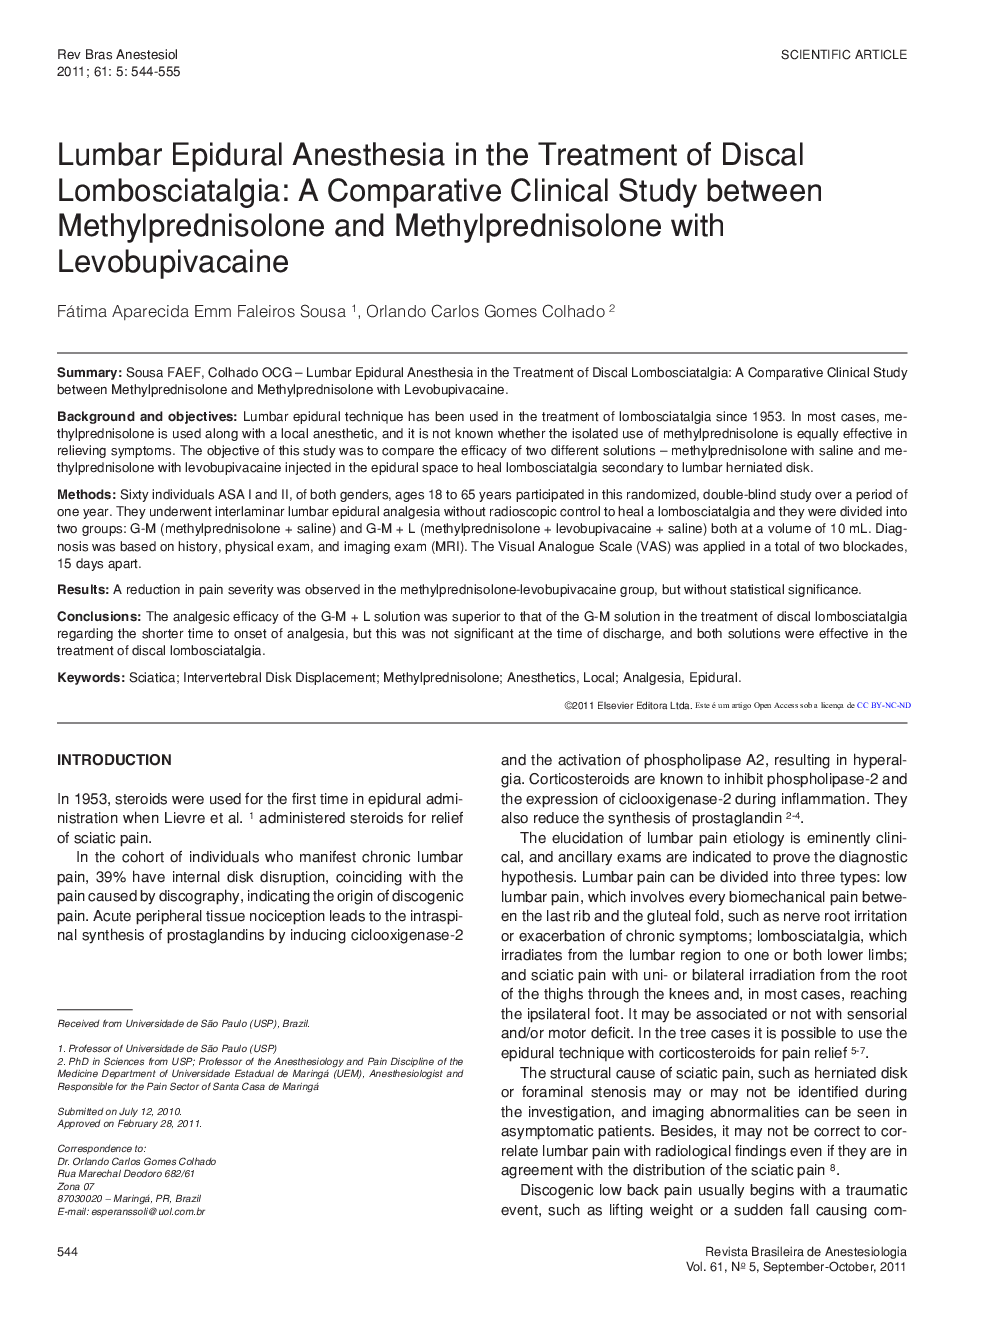 Lumbar Epidural Anesthesia in the Treatment of Discal Lombosciatalgia: A Comparative Clinical Study between Methylprednisolone and Methylprednisolone with Levobupivacaine